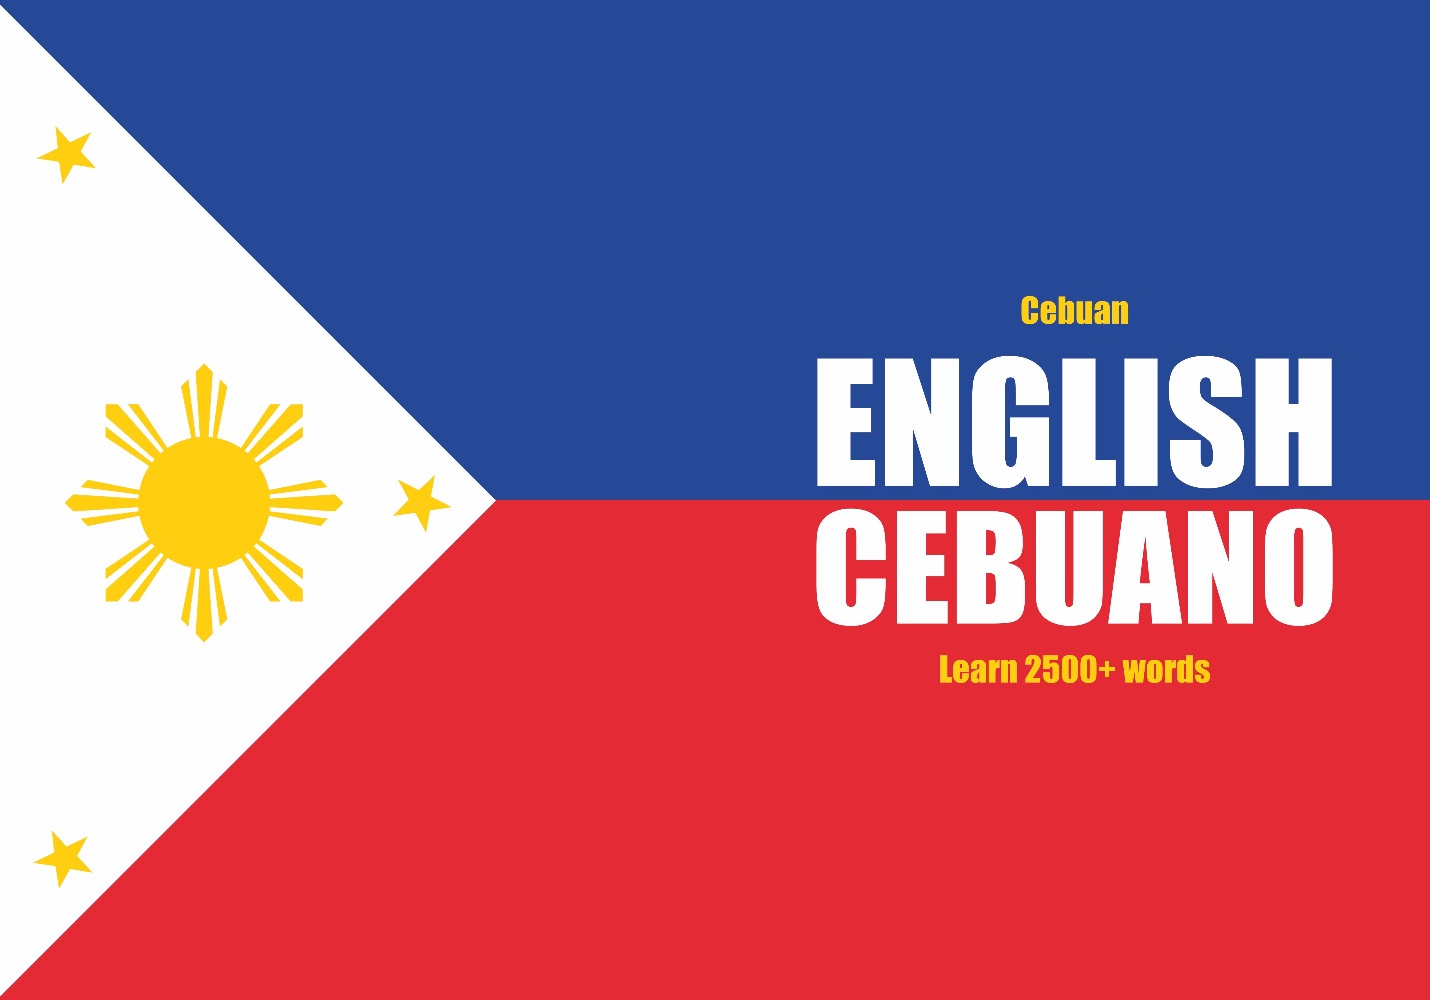 Cebuano language learning notebook cover